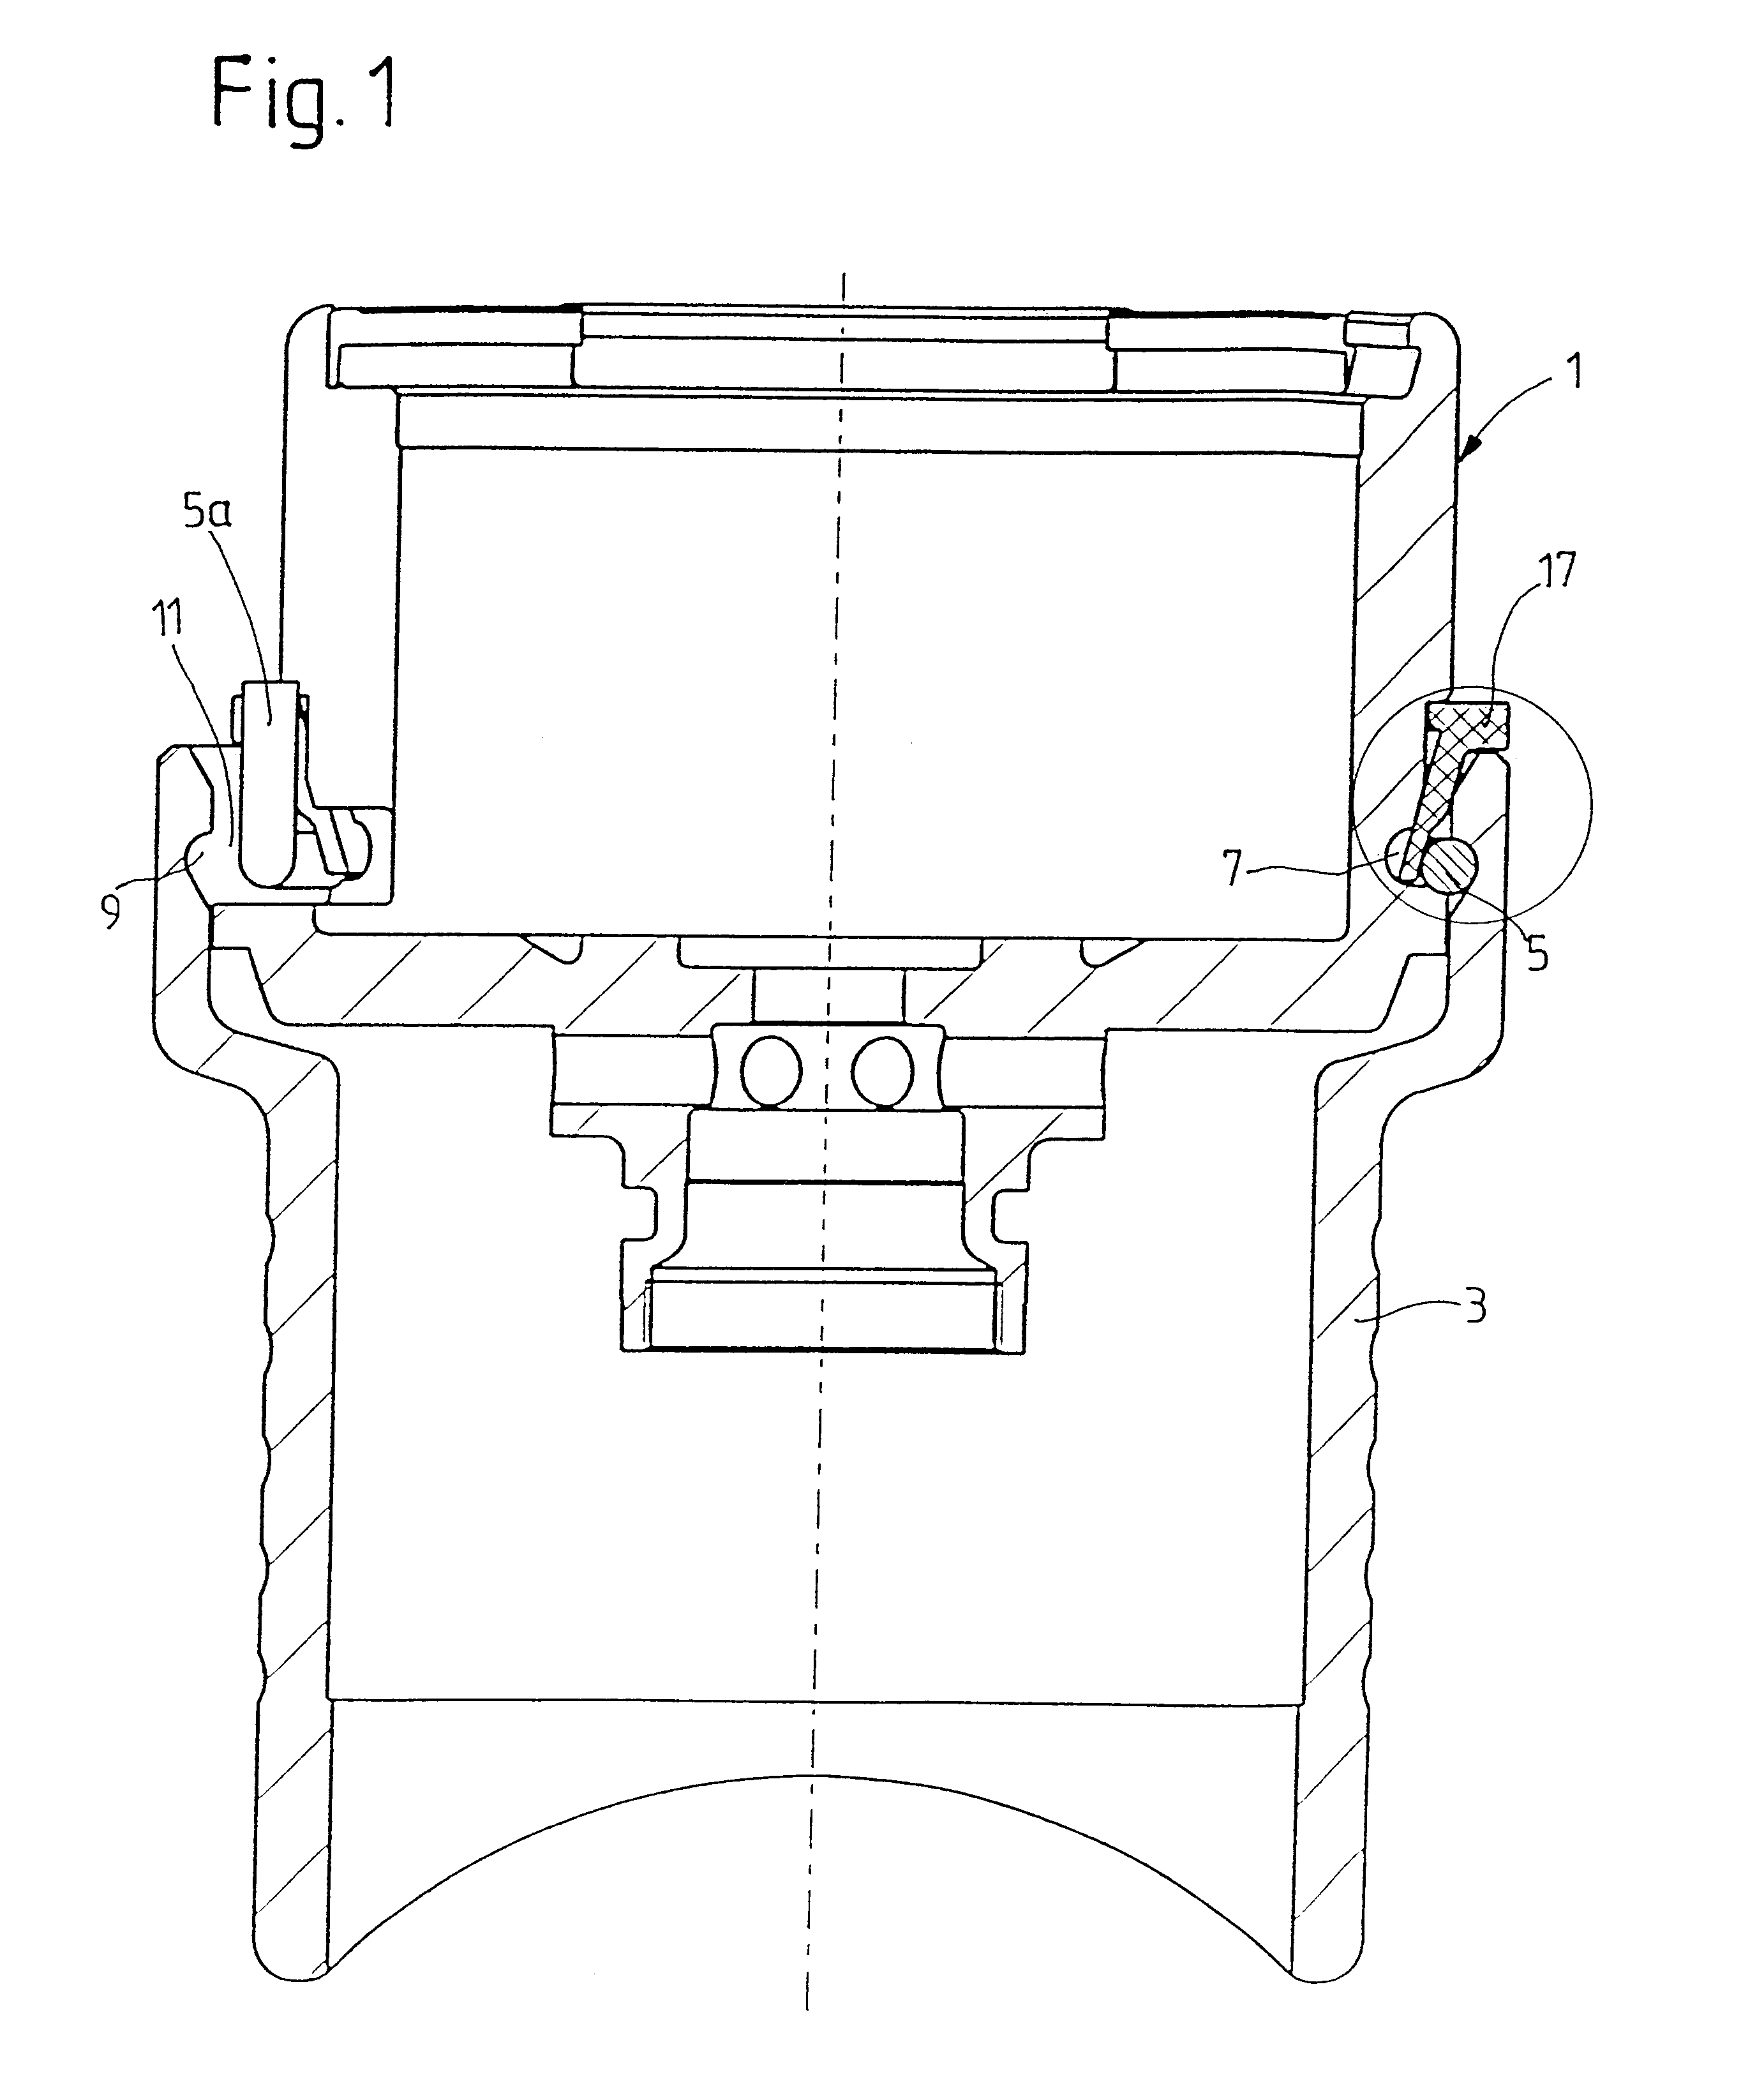 Axial securing device for two components by means of a locking ring